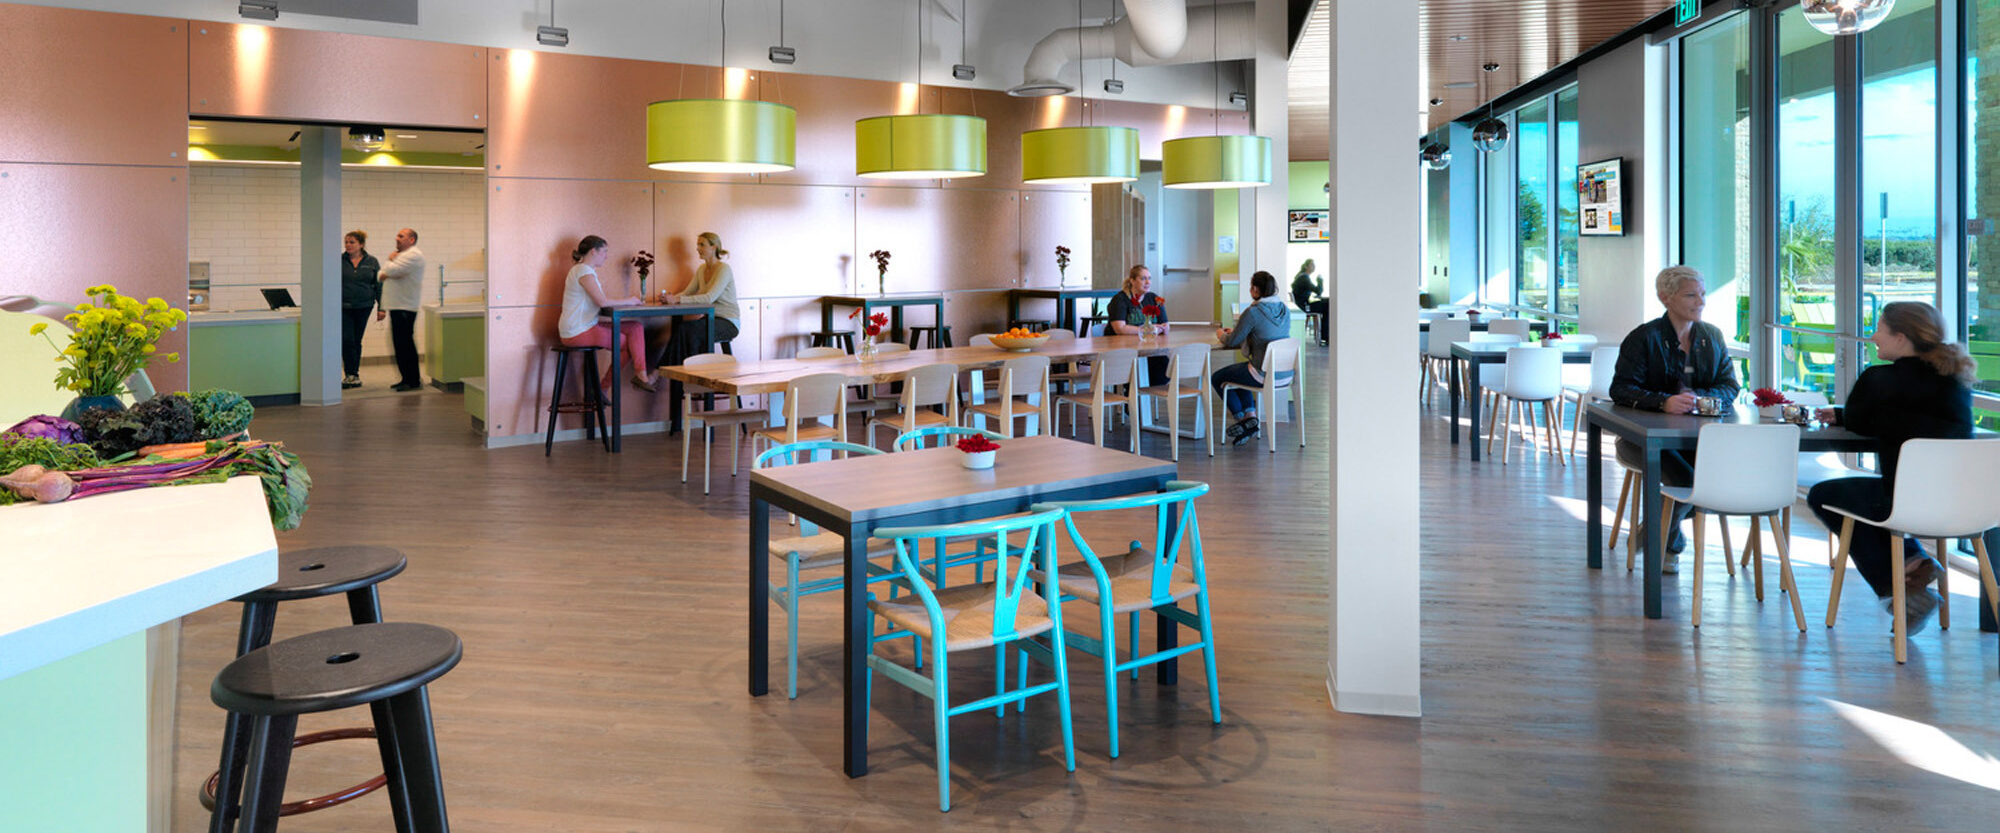 Bright and spacious cafeteria featuring sleek white furniture, colorful accents, and wooden cladding. Overhead, pistachio green pendant lights complement the room's modern and welcoming aesthetic. Large windows invite ample natural light, enhancing the open and dynamic dining area.